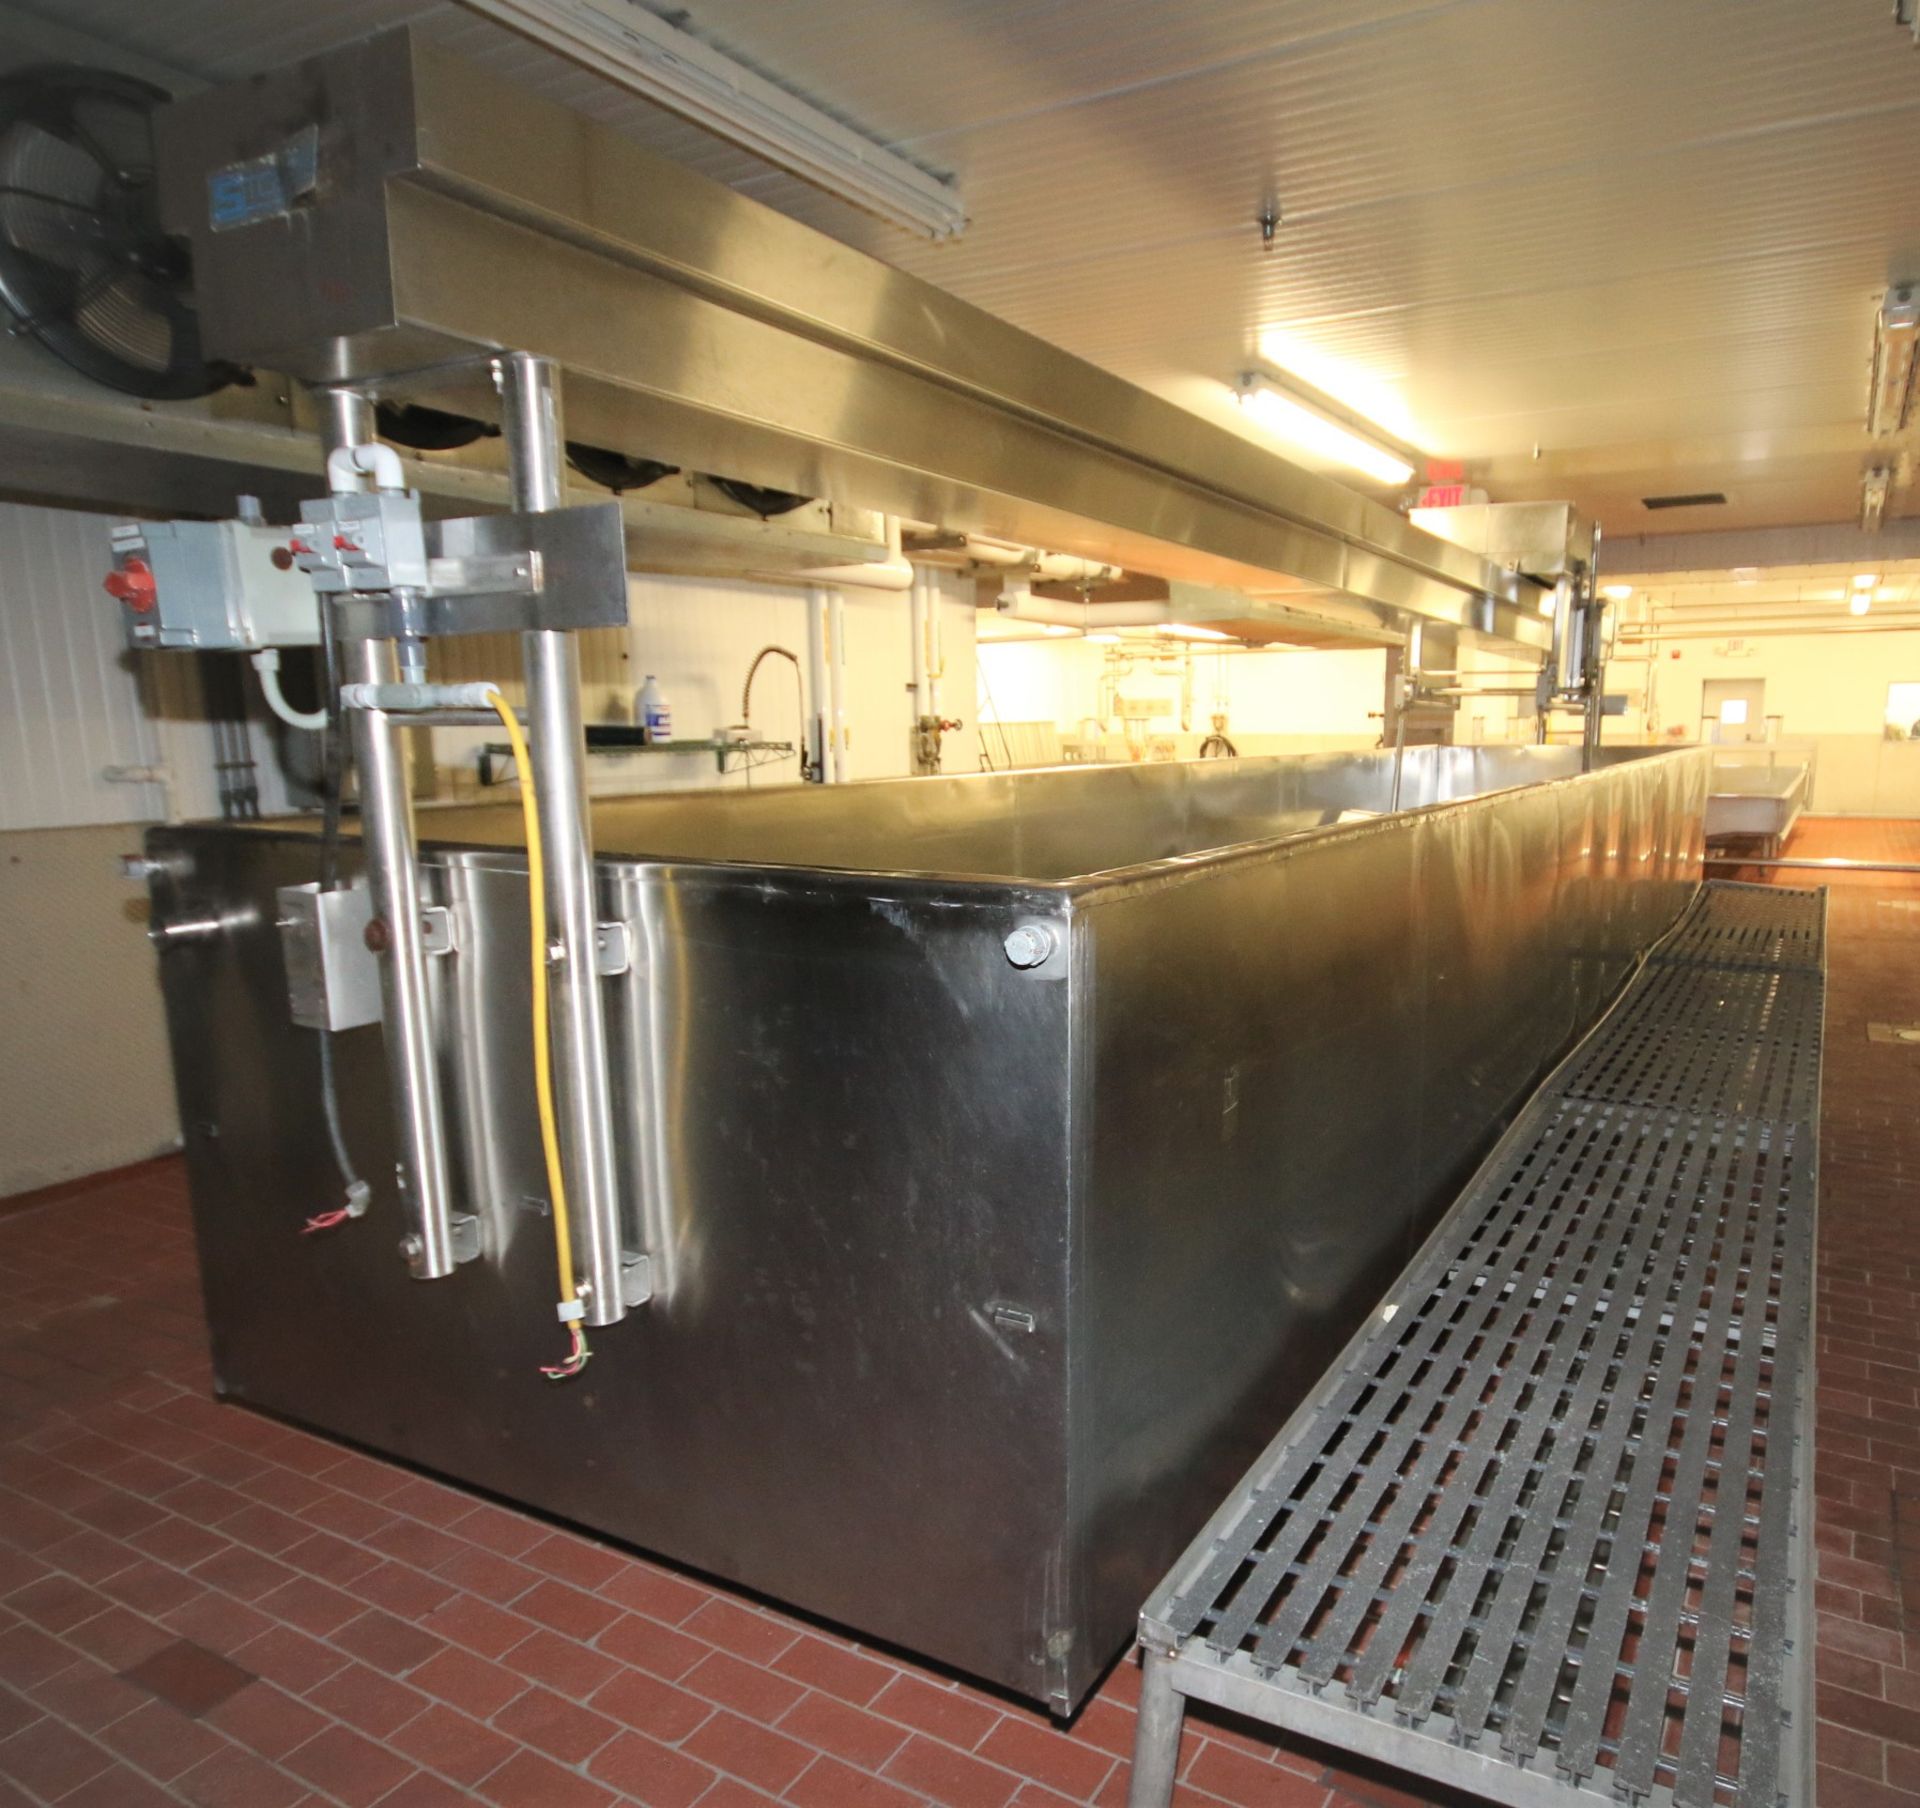 Stoelting ~4,000 Gal. Open Top Jacketed S/S Cheese Vat, Model VERTISTIR, S/N 338-045-59-3500-83 with - Image 7 of 9